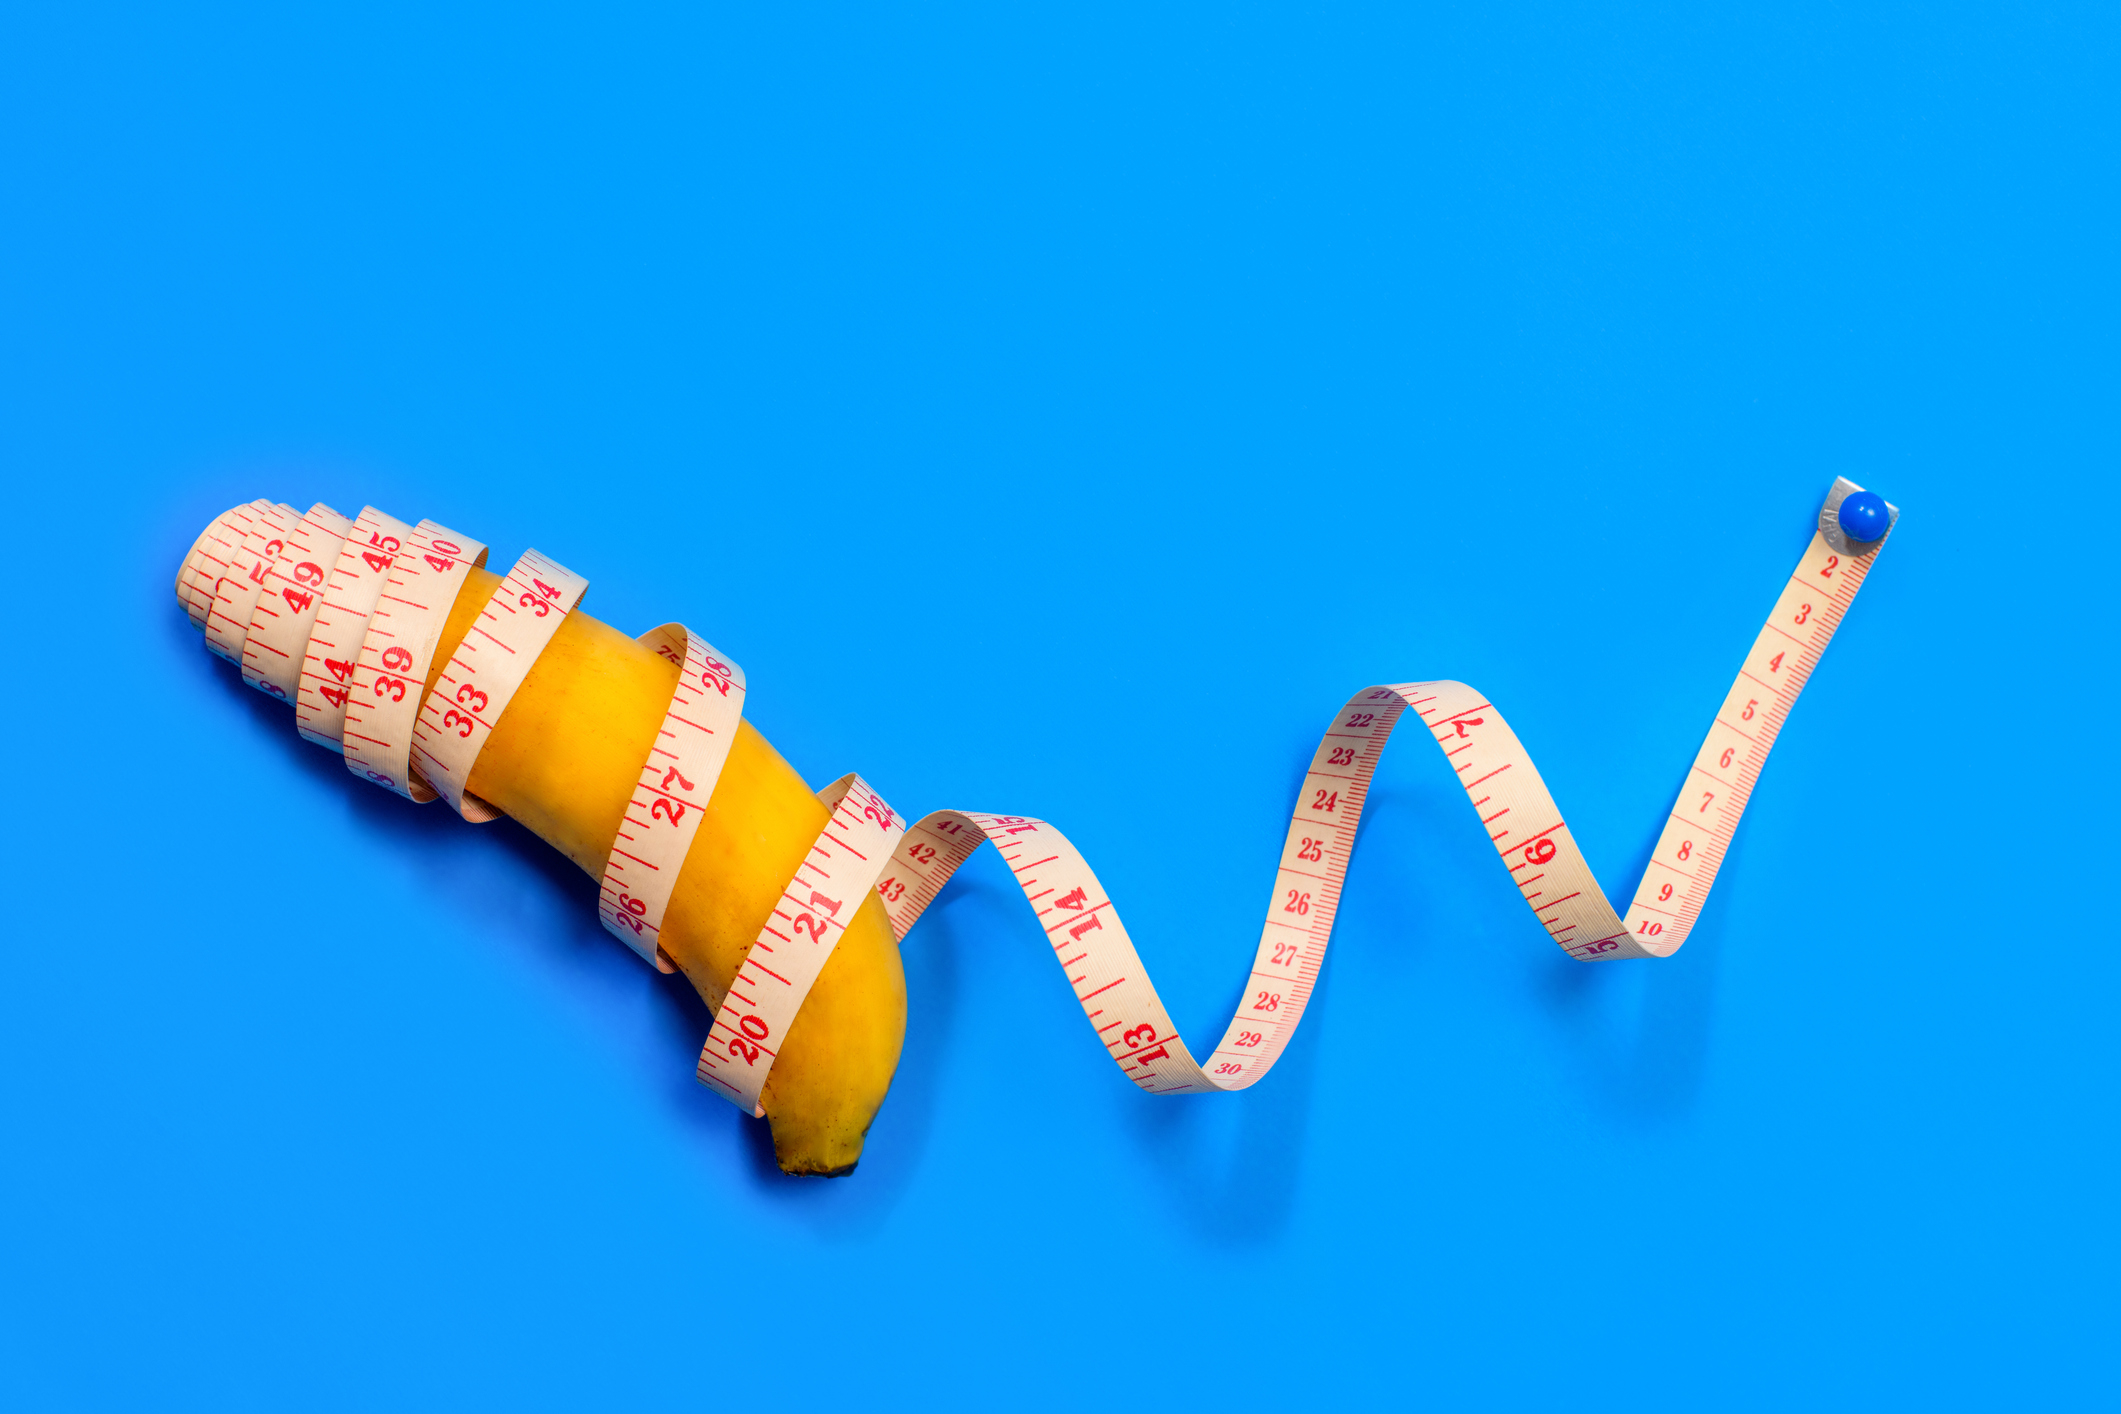 Banana wrapped with a measuring tape on a blue background, implying body image themes related to sex and love